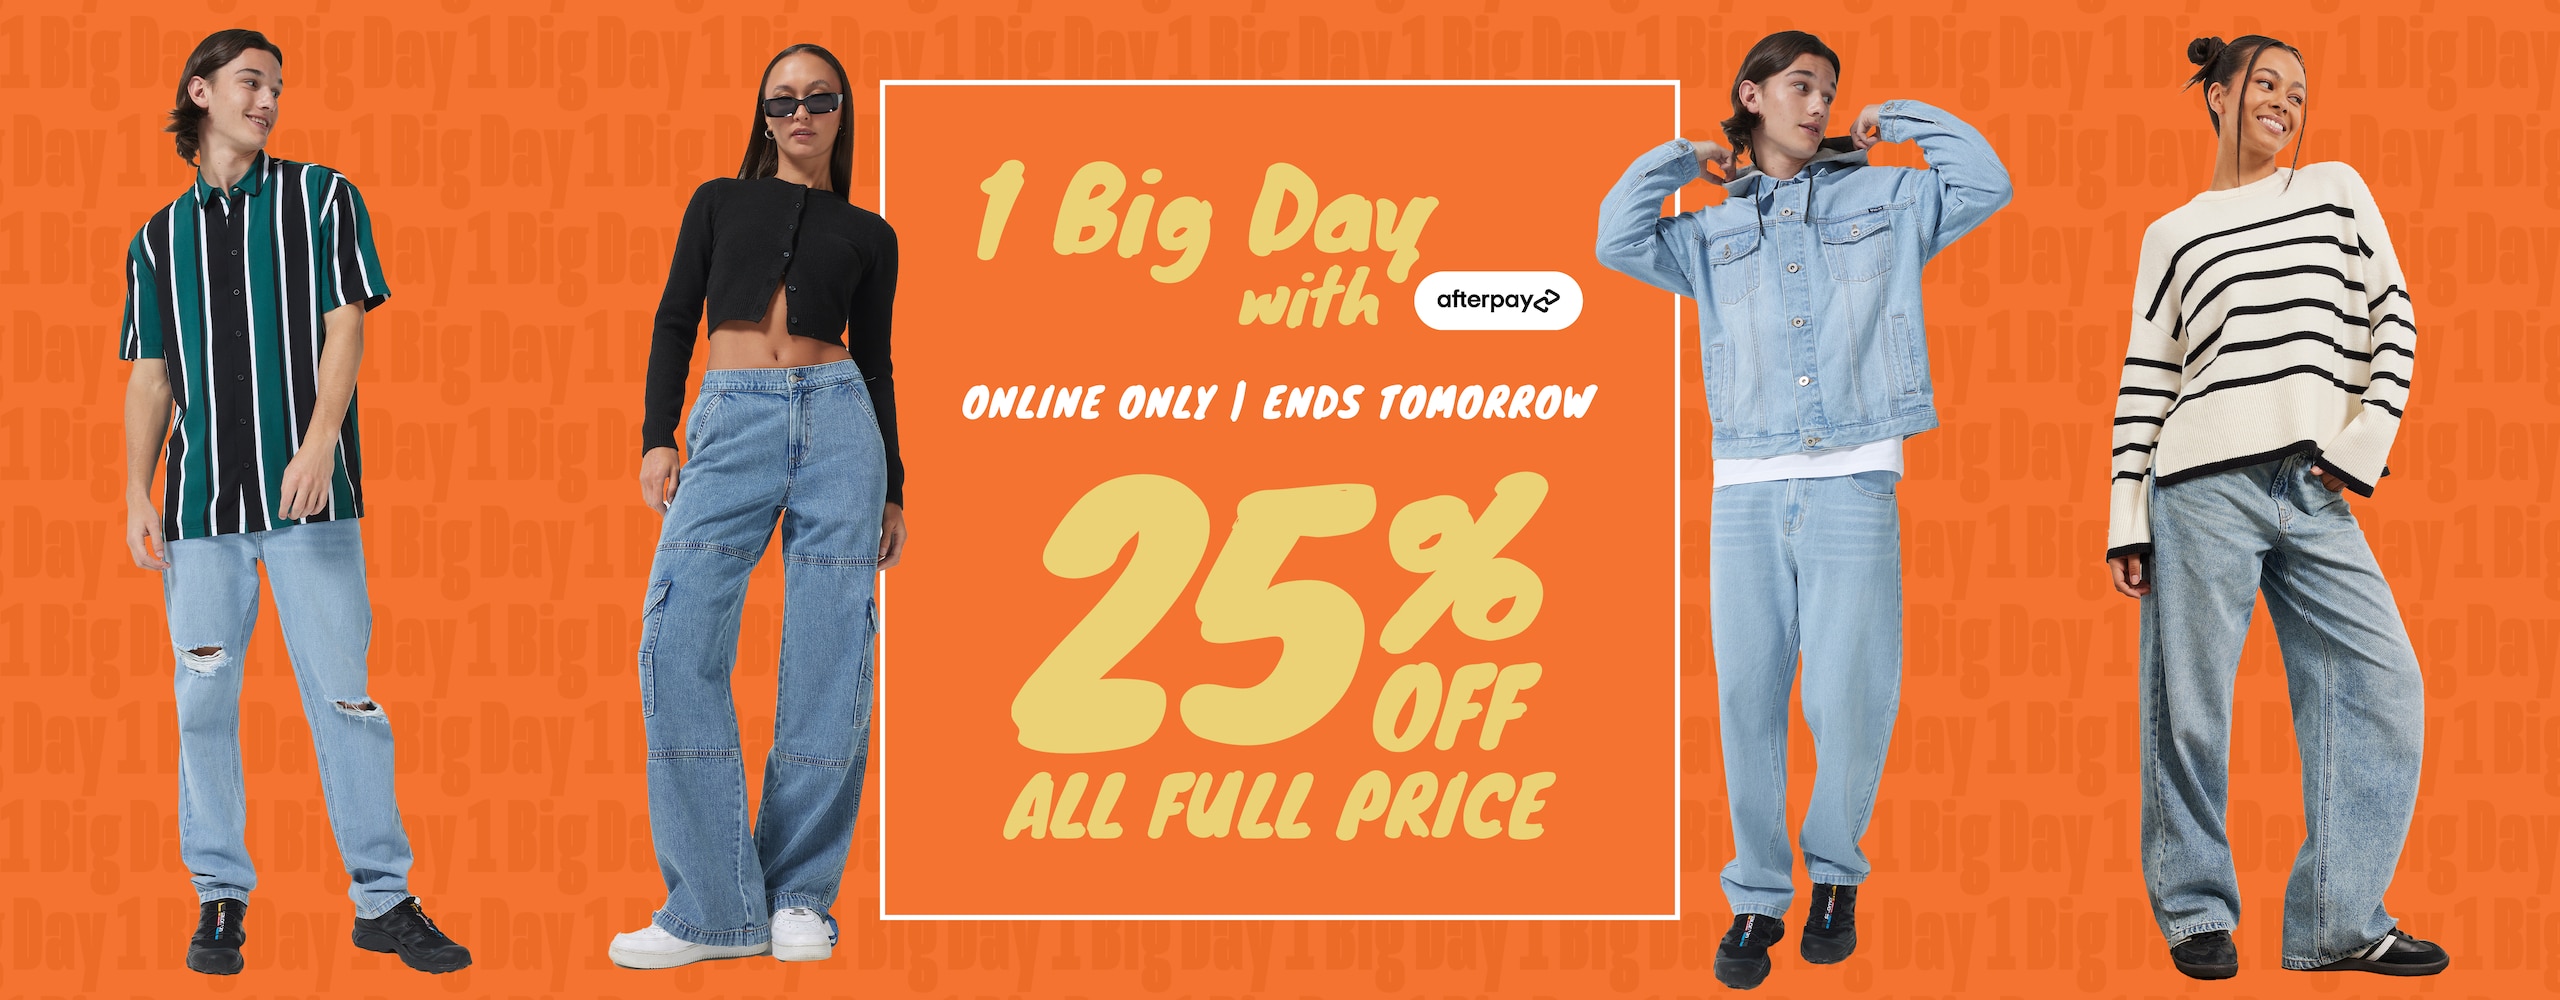 1 Big Day With Afterpay. Online Only. Ends Tonight. 25% Off All Full Price